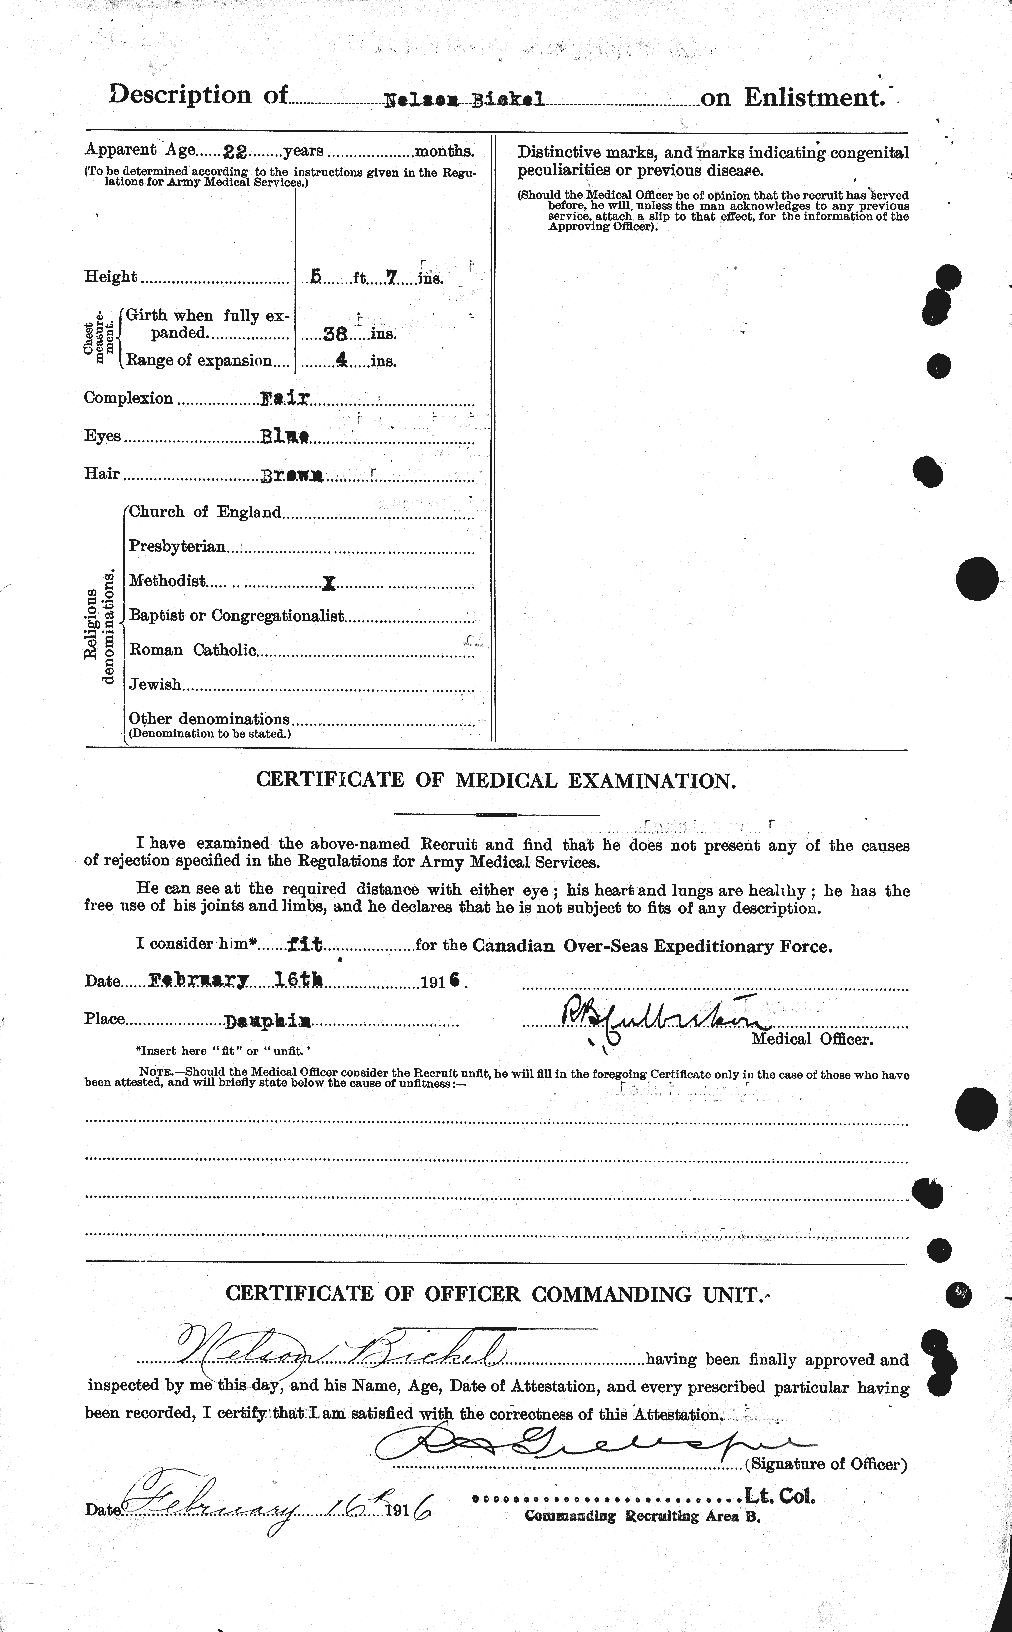 Personnel Records of the First World War - CEF 244976b